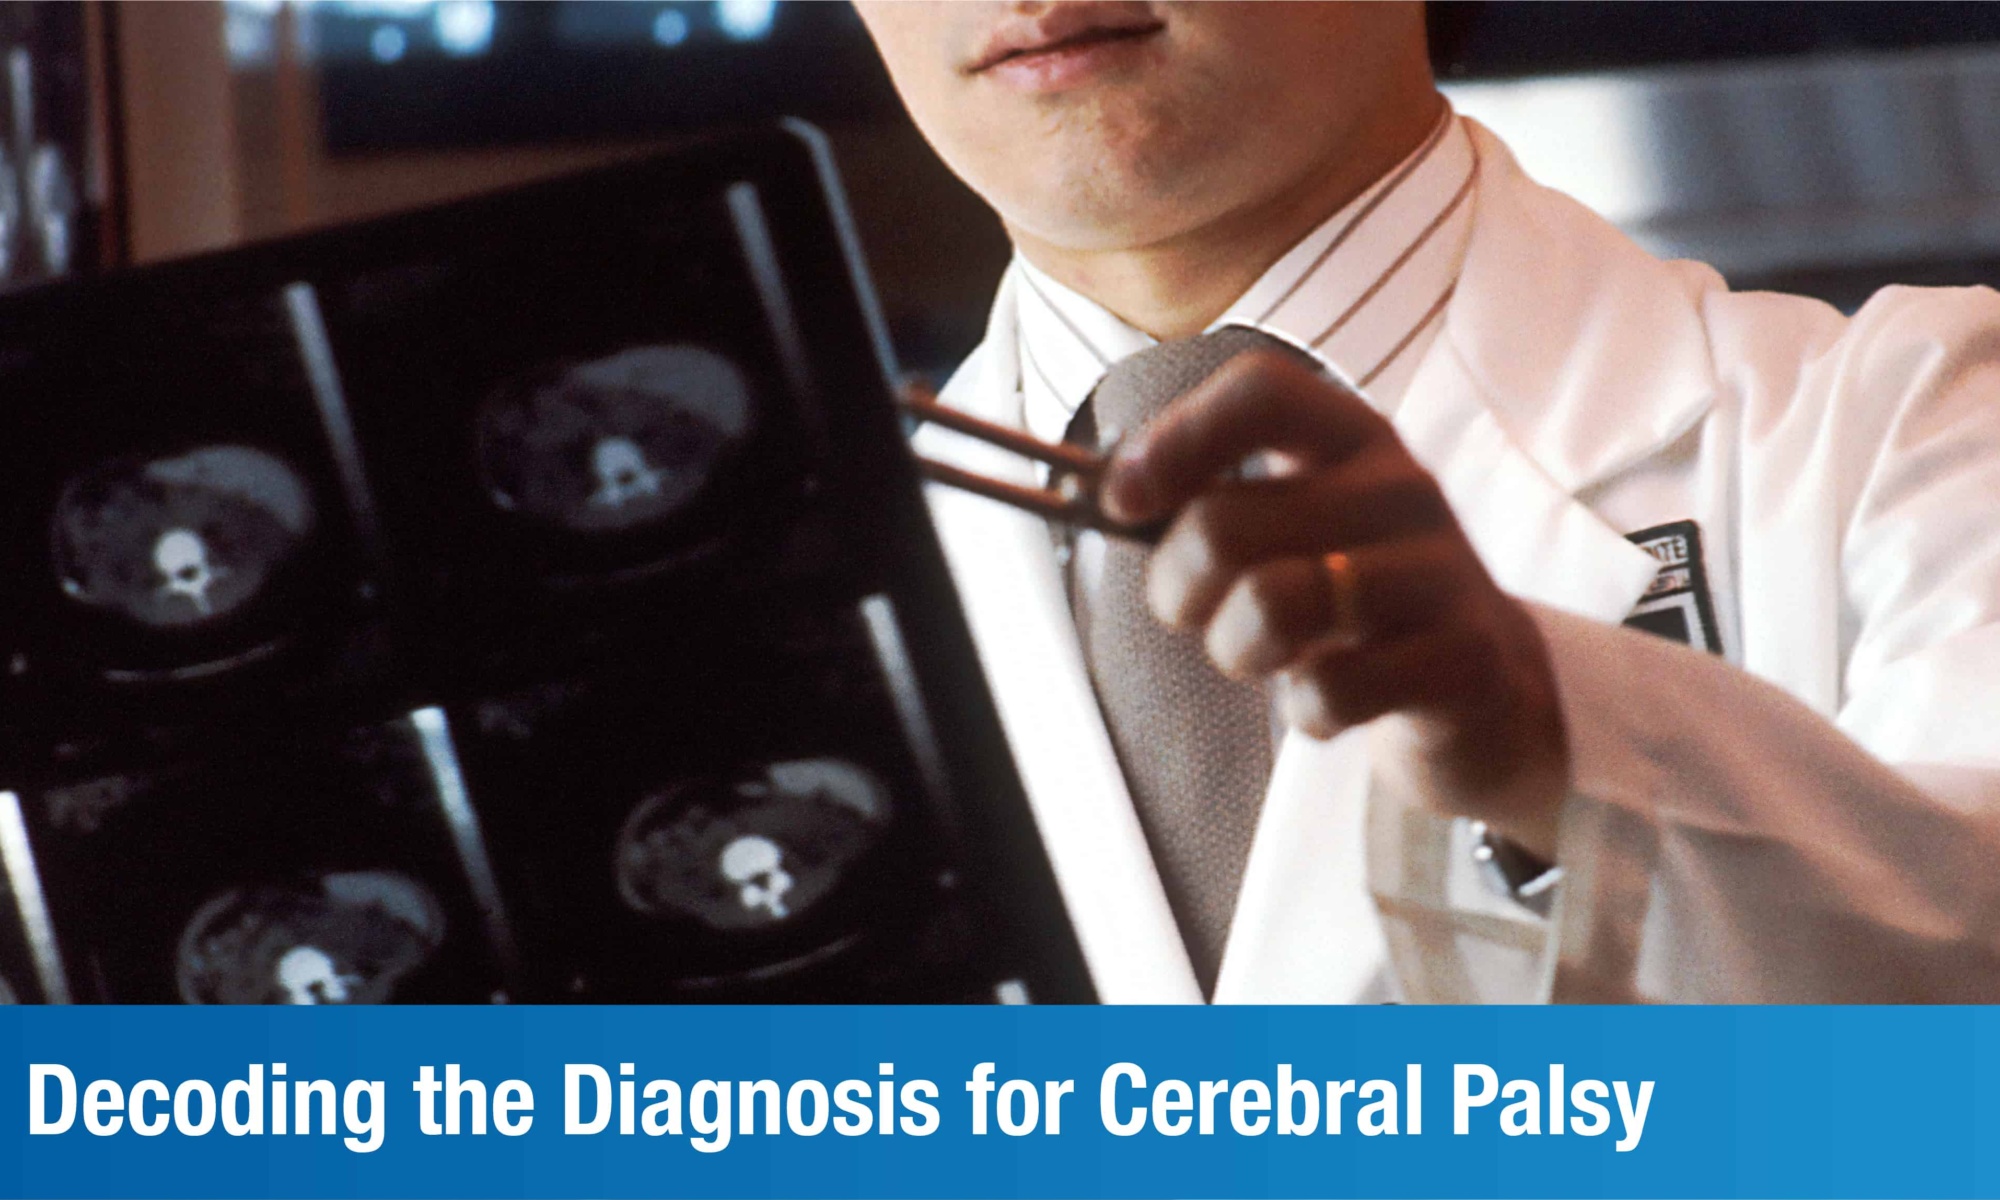 Learn About the Diagnosis for Cerebral Palsy